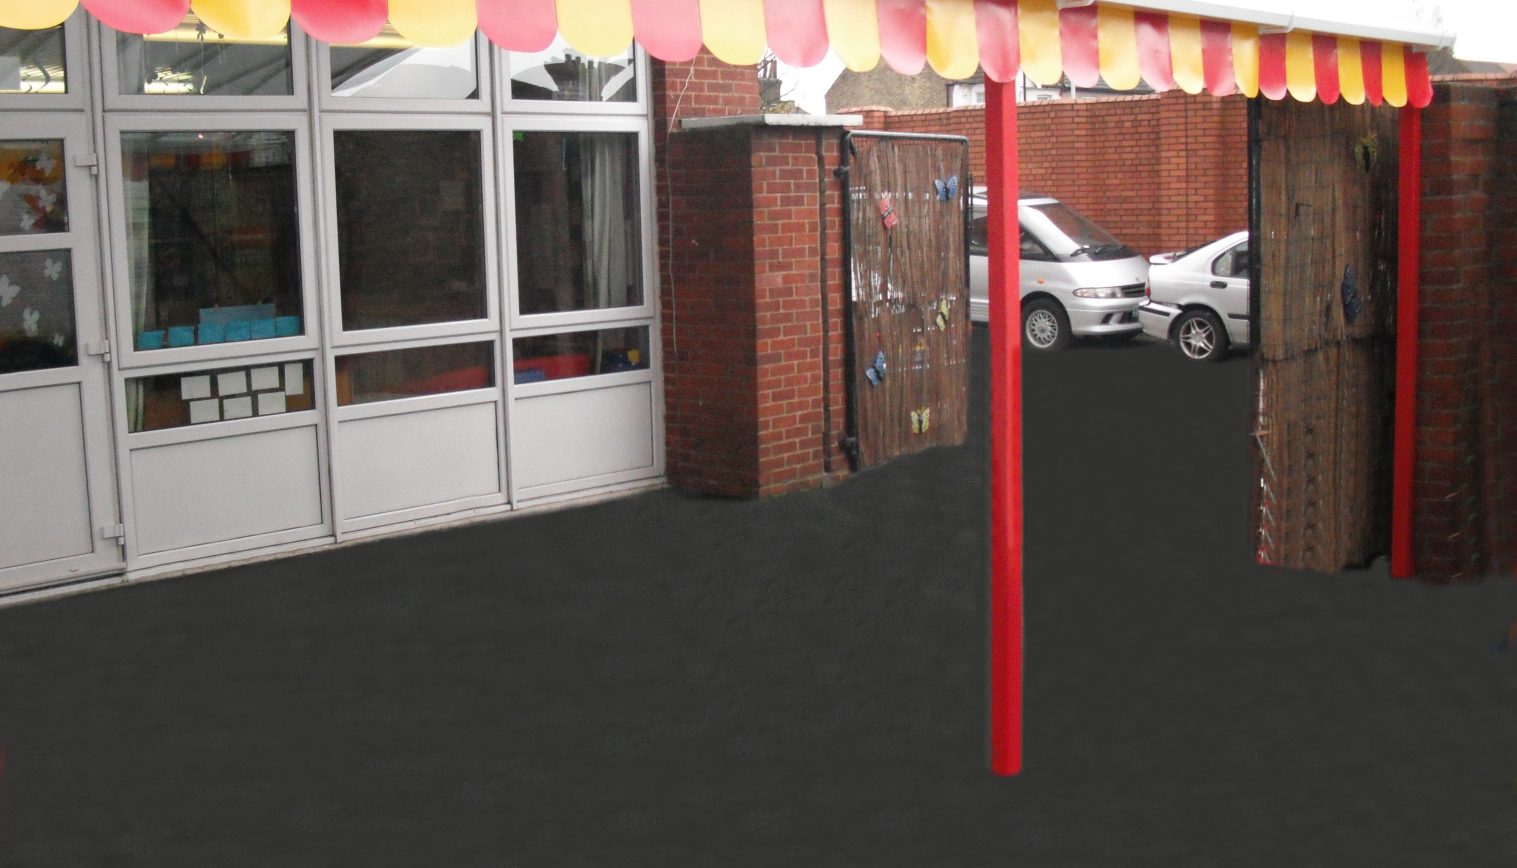 Step by Step Children’s Centre – Wall Mounted Canopy